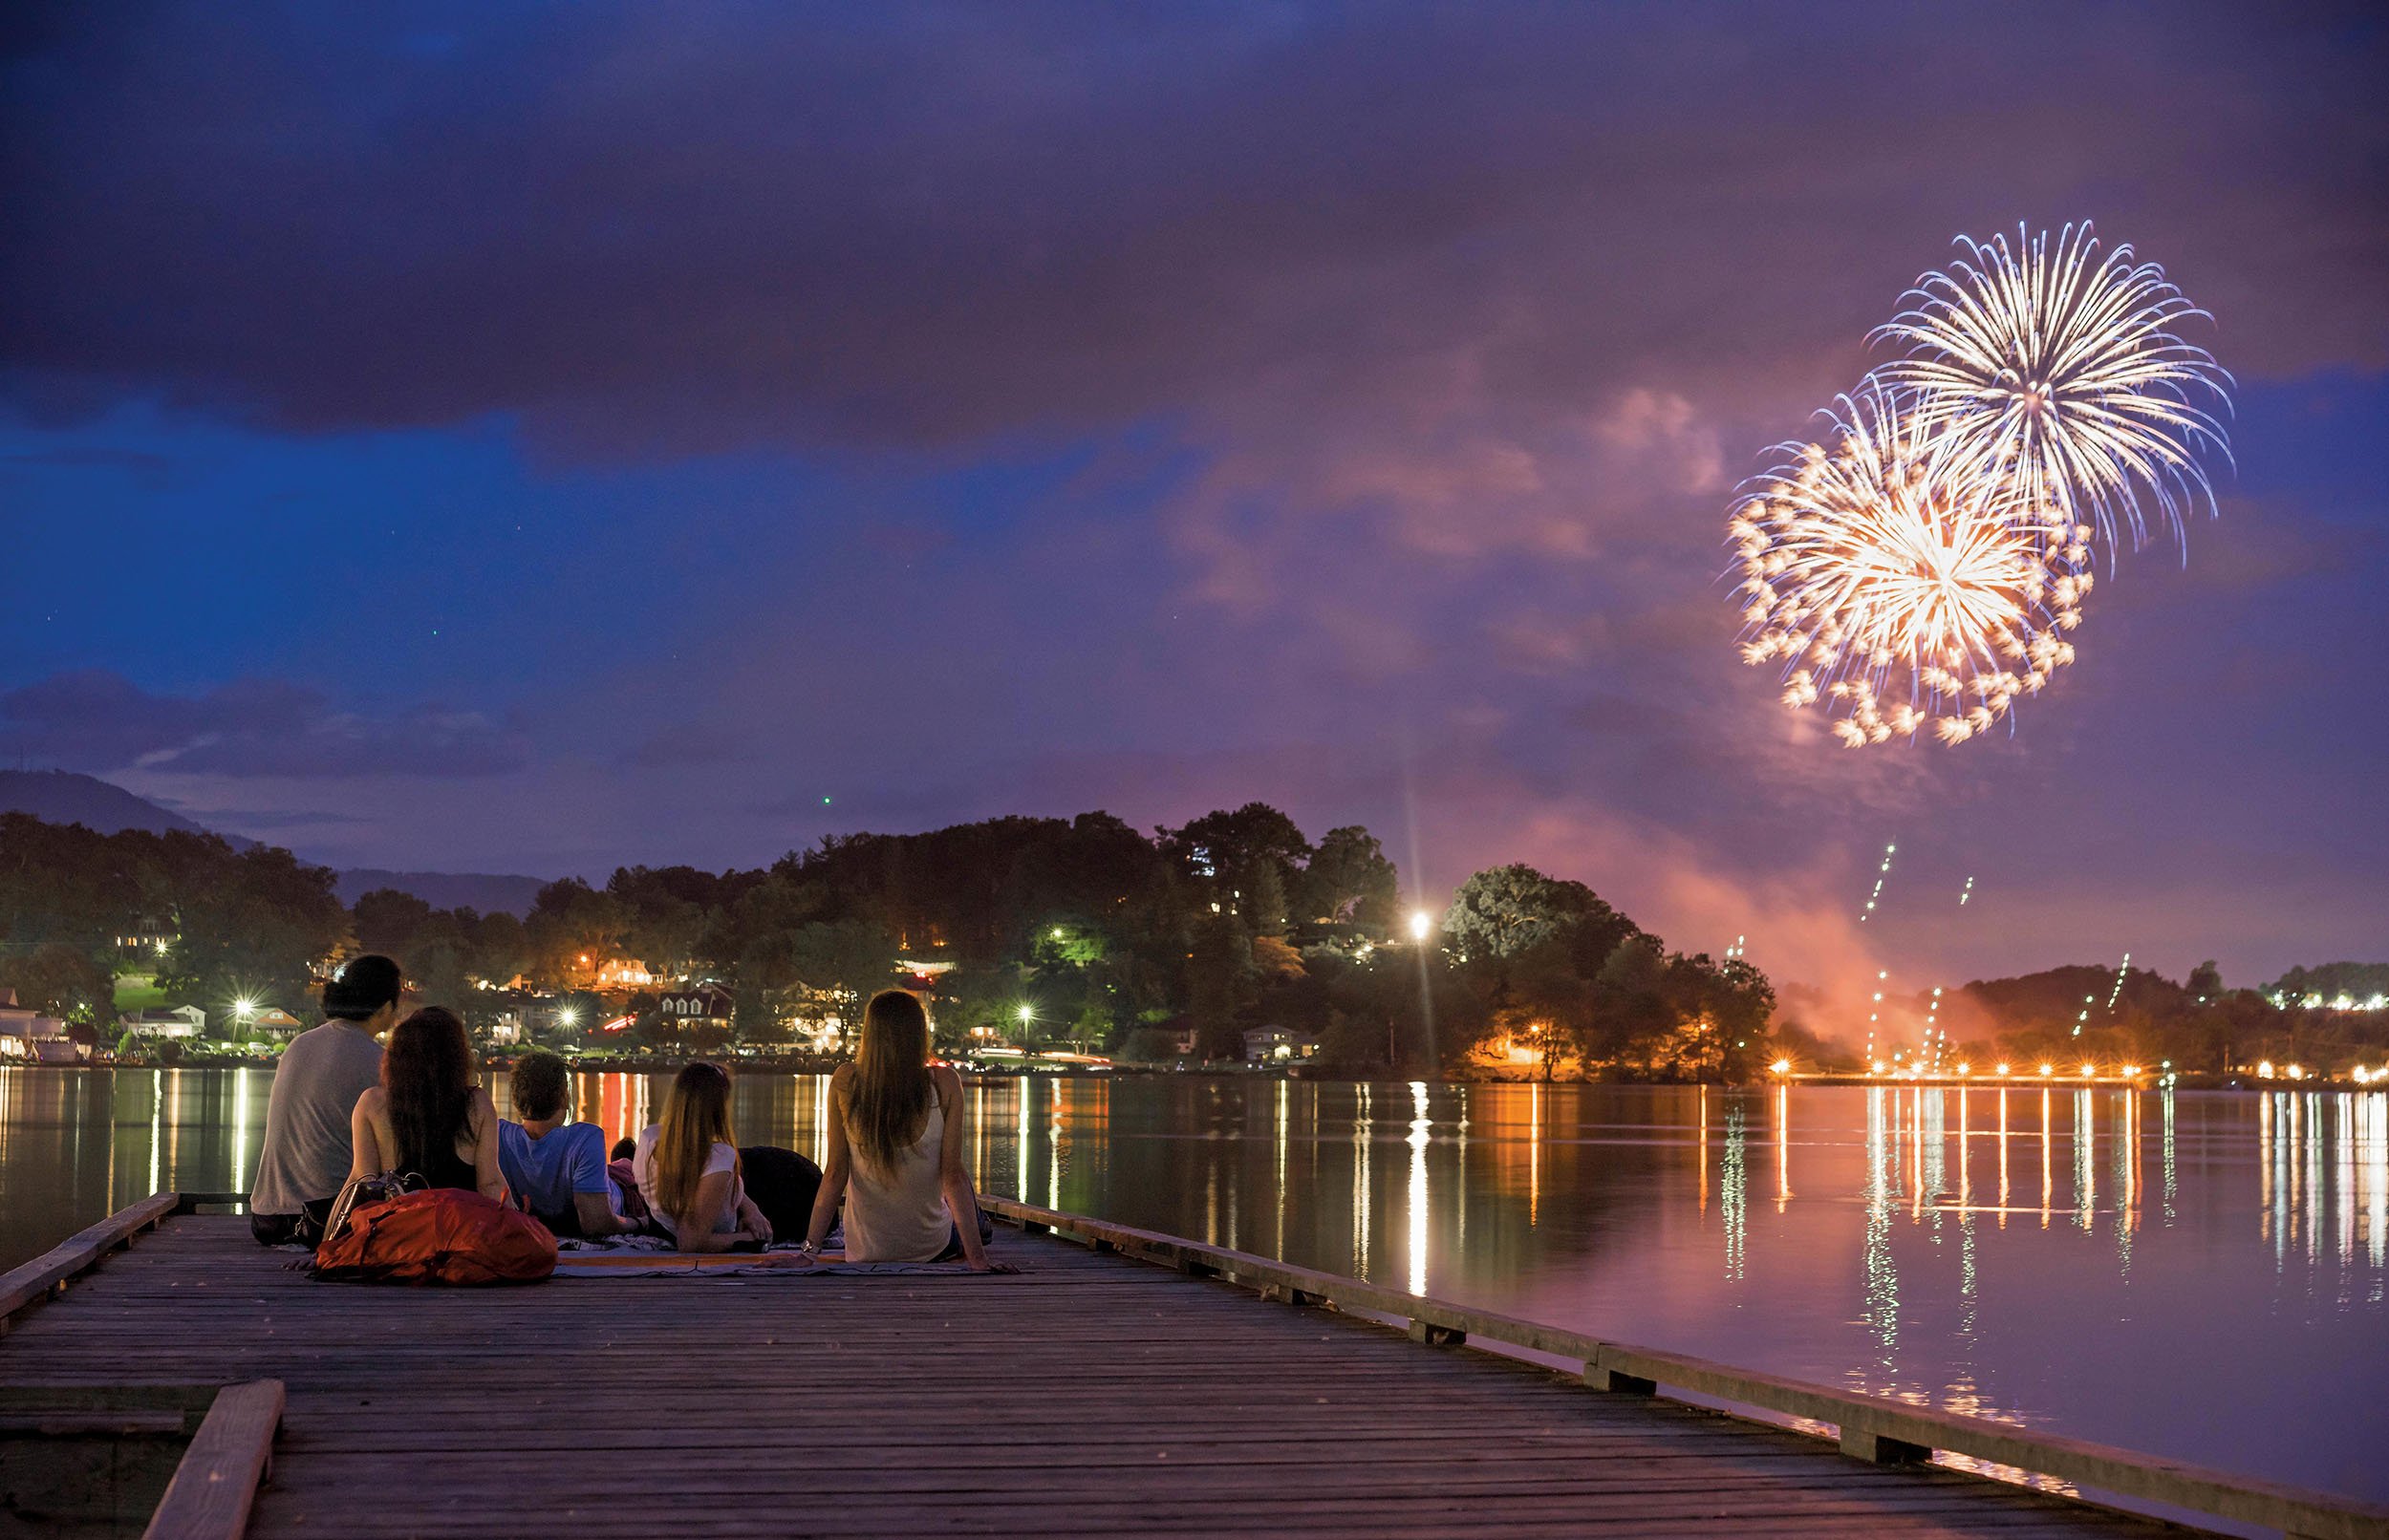 A family watching fireworks over Lake Junaluska while sitting on a wooden dock